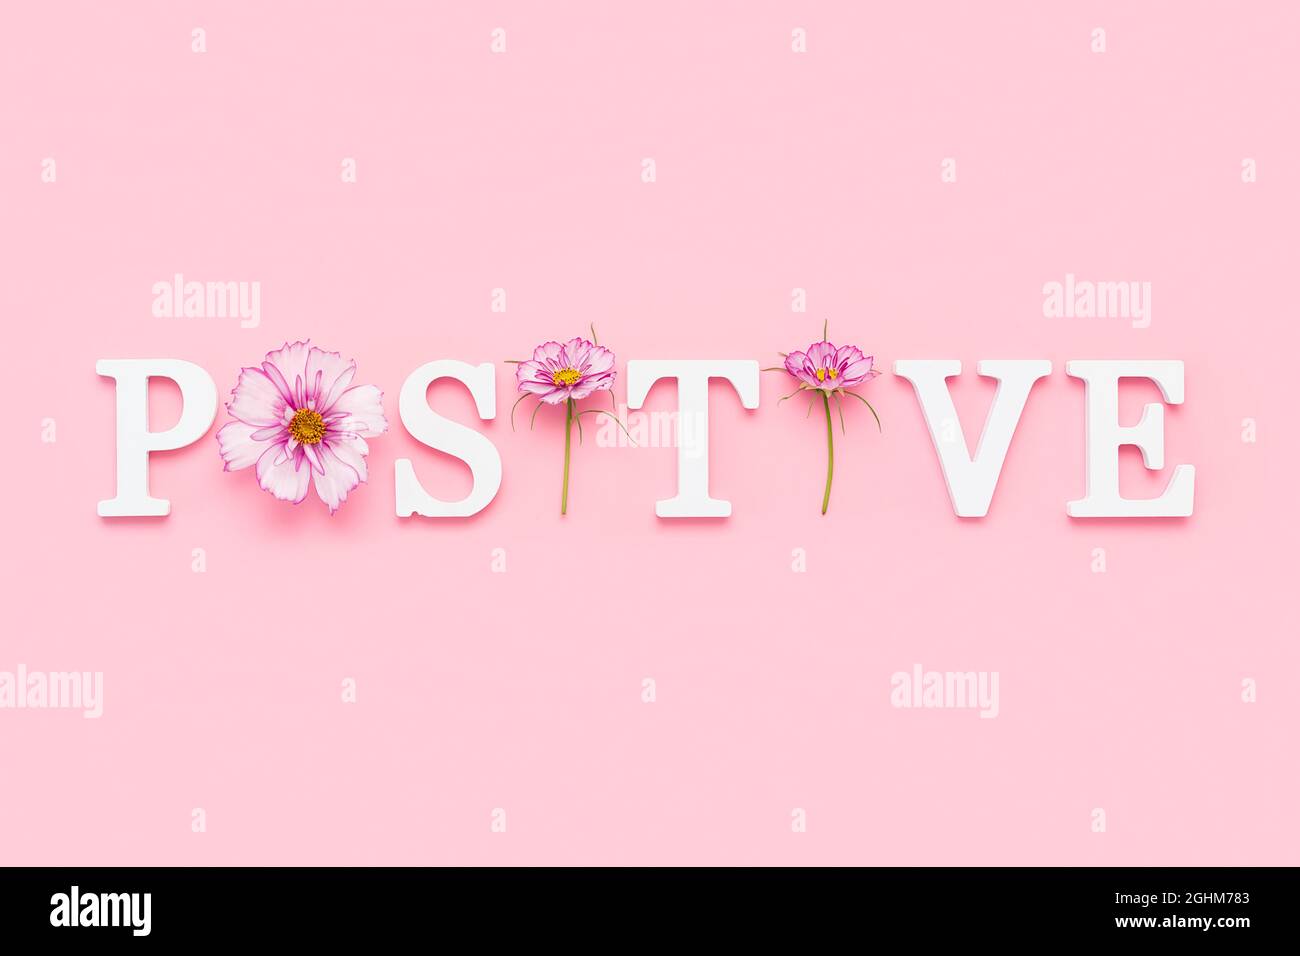 Positive. Motivational quote from white letters and beauty natural flowers on pink background. Creative concept inspirational quote of the day. Stock Photo